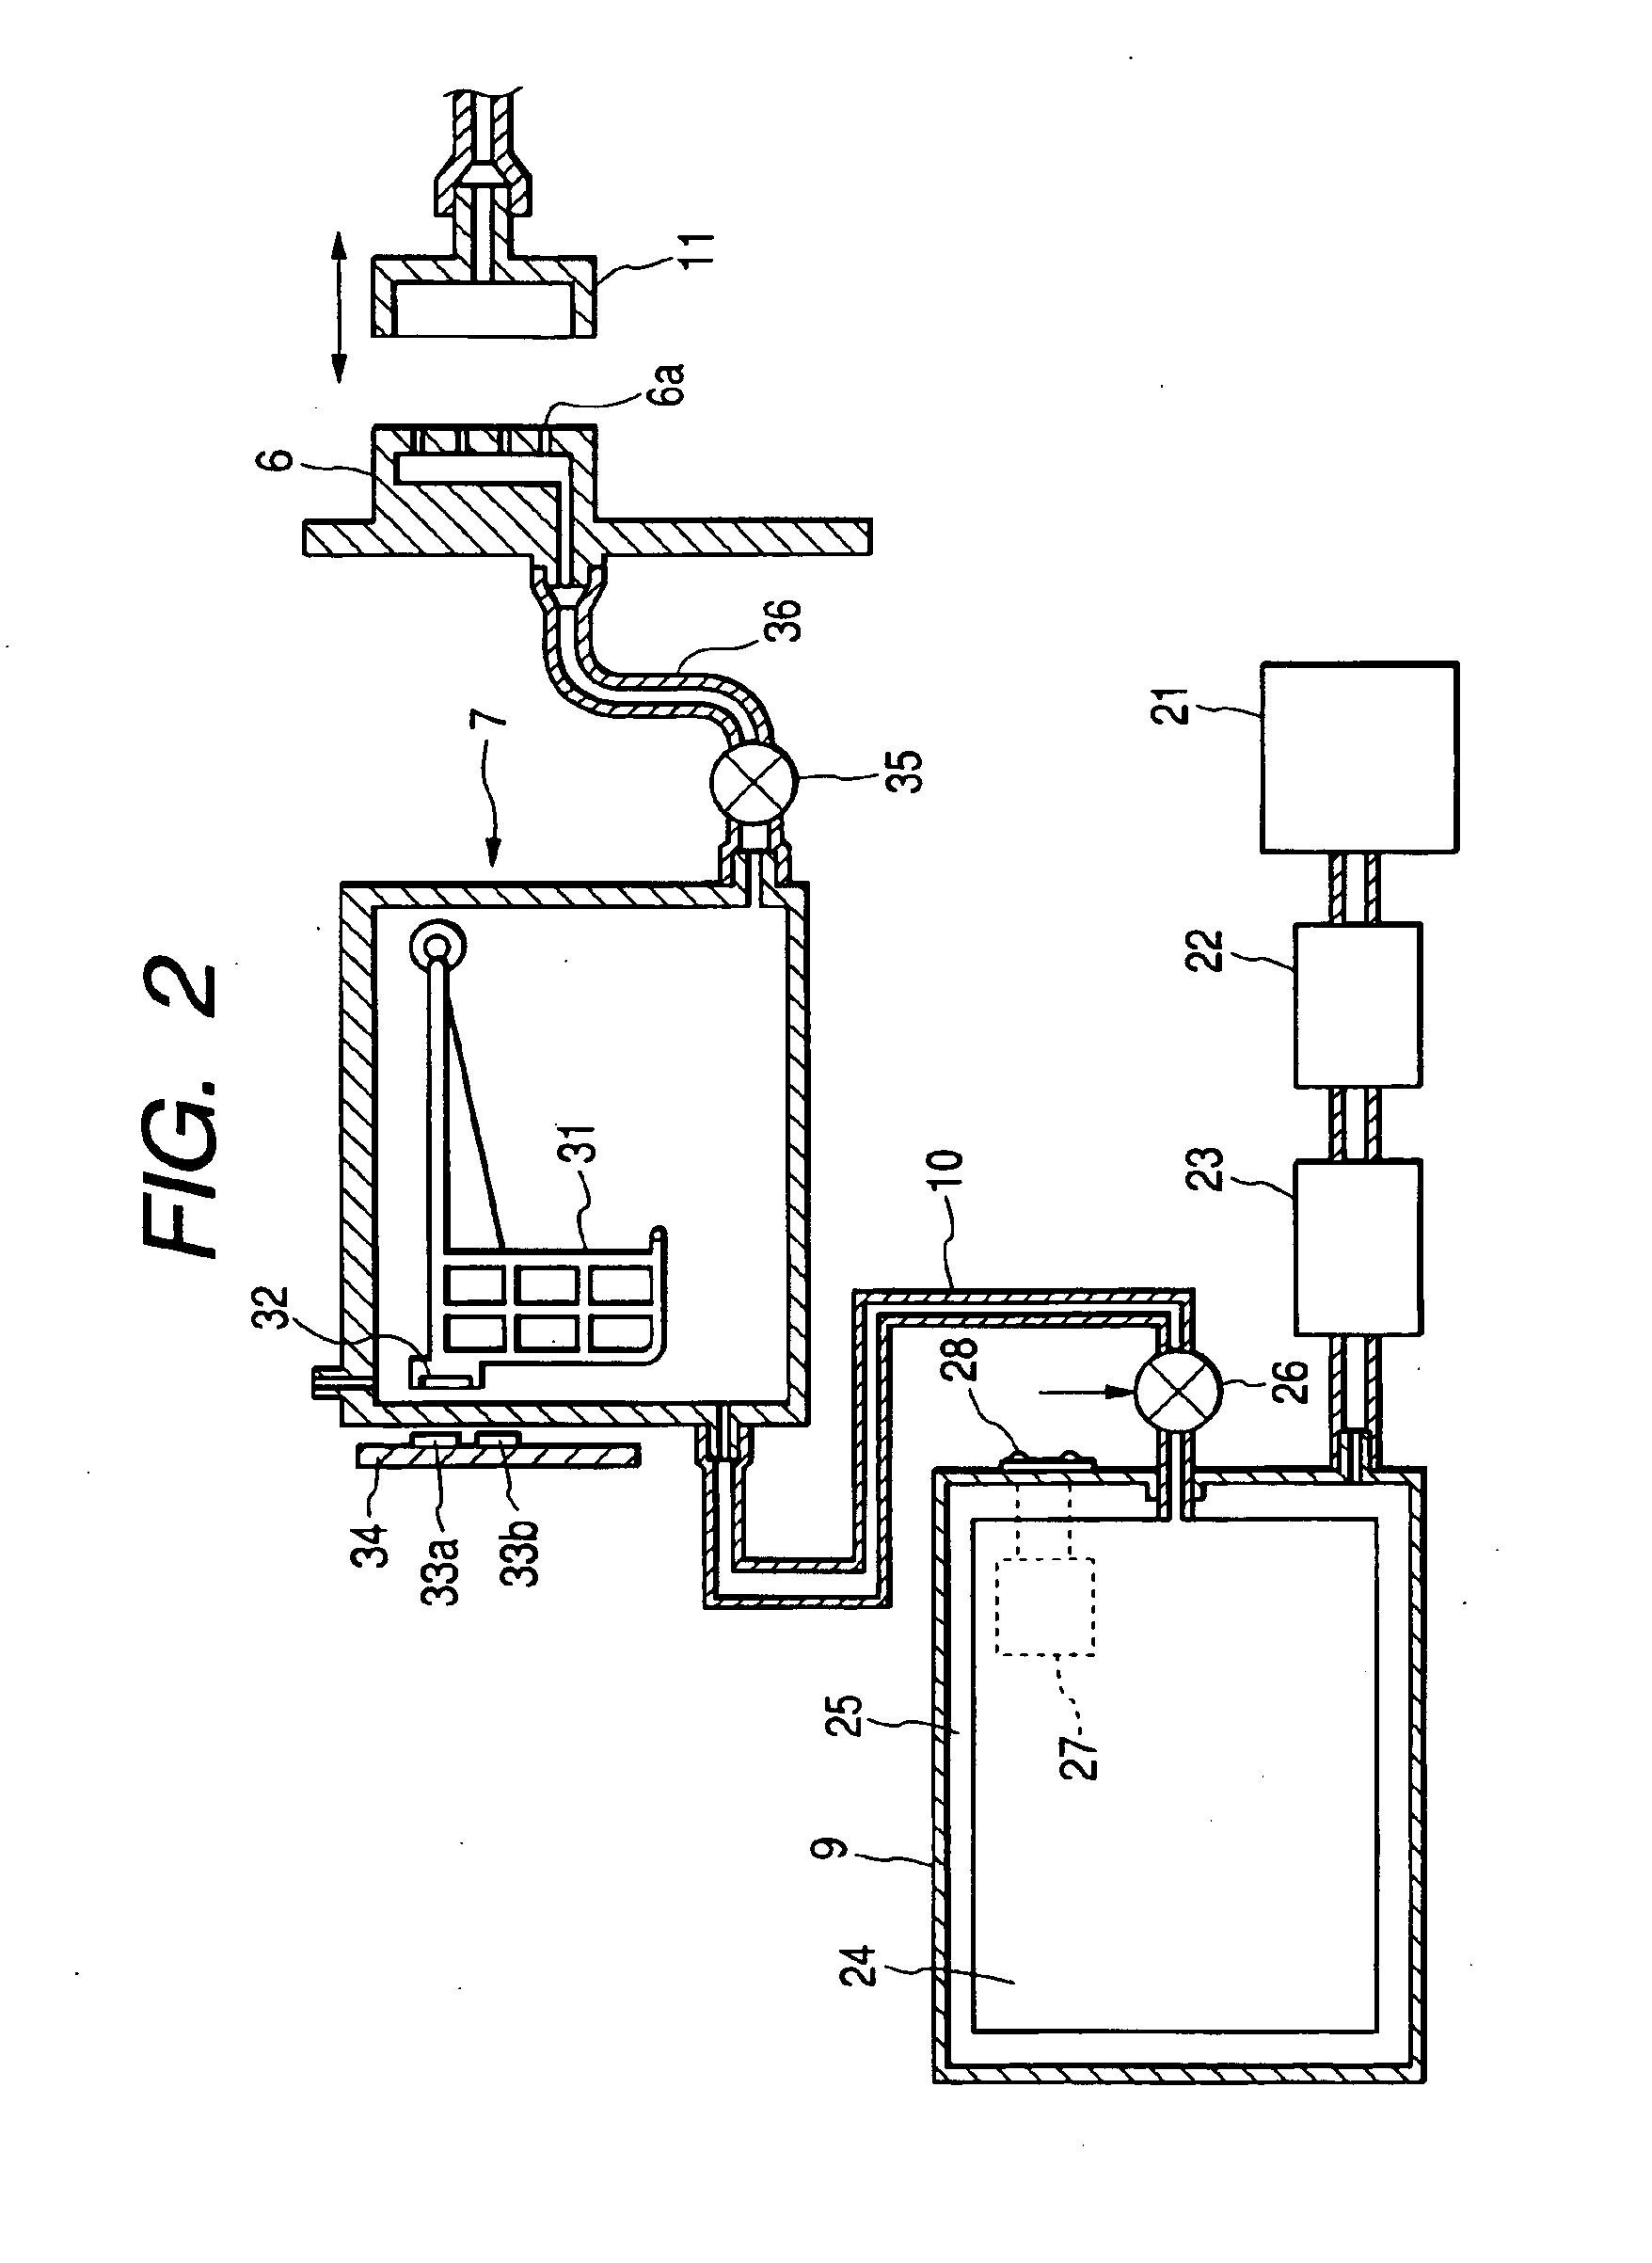 Ink jet recording apparatus, and method of supplying ink to sub-tank of the ink jet recording apparatus